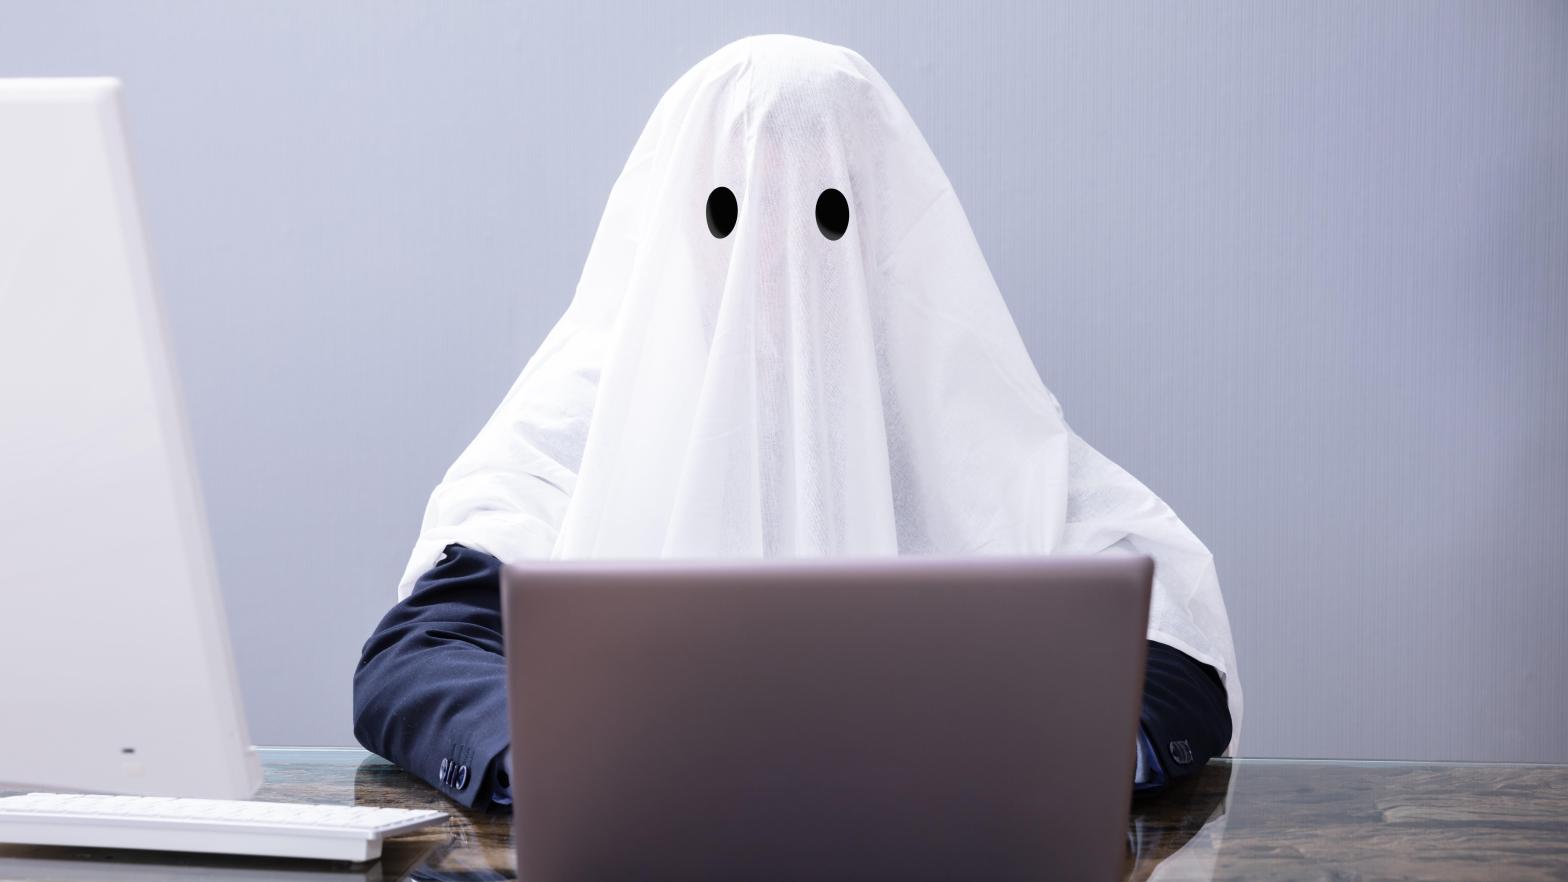 Since crypto hackers are rarely, if ever caught, they may as well be ghosts as far as crypto companies and DeFi projects are concerned. (Photo: Andrey_Popov, Shutterstock)